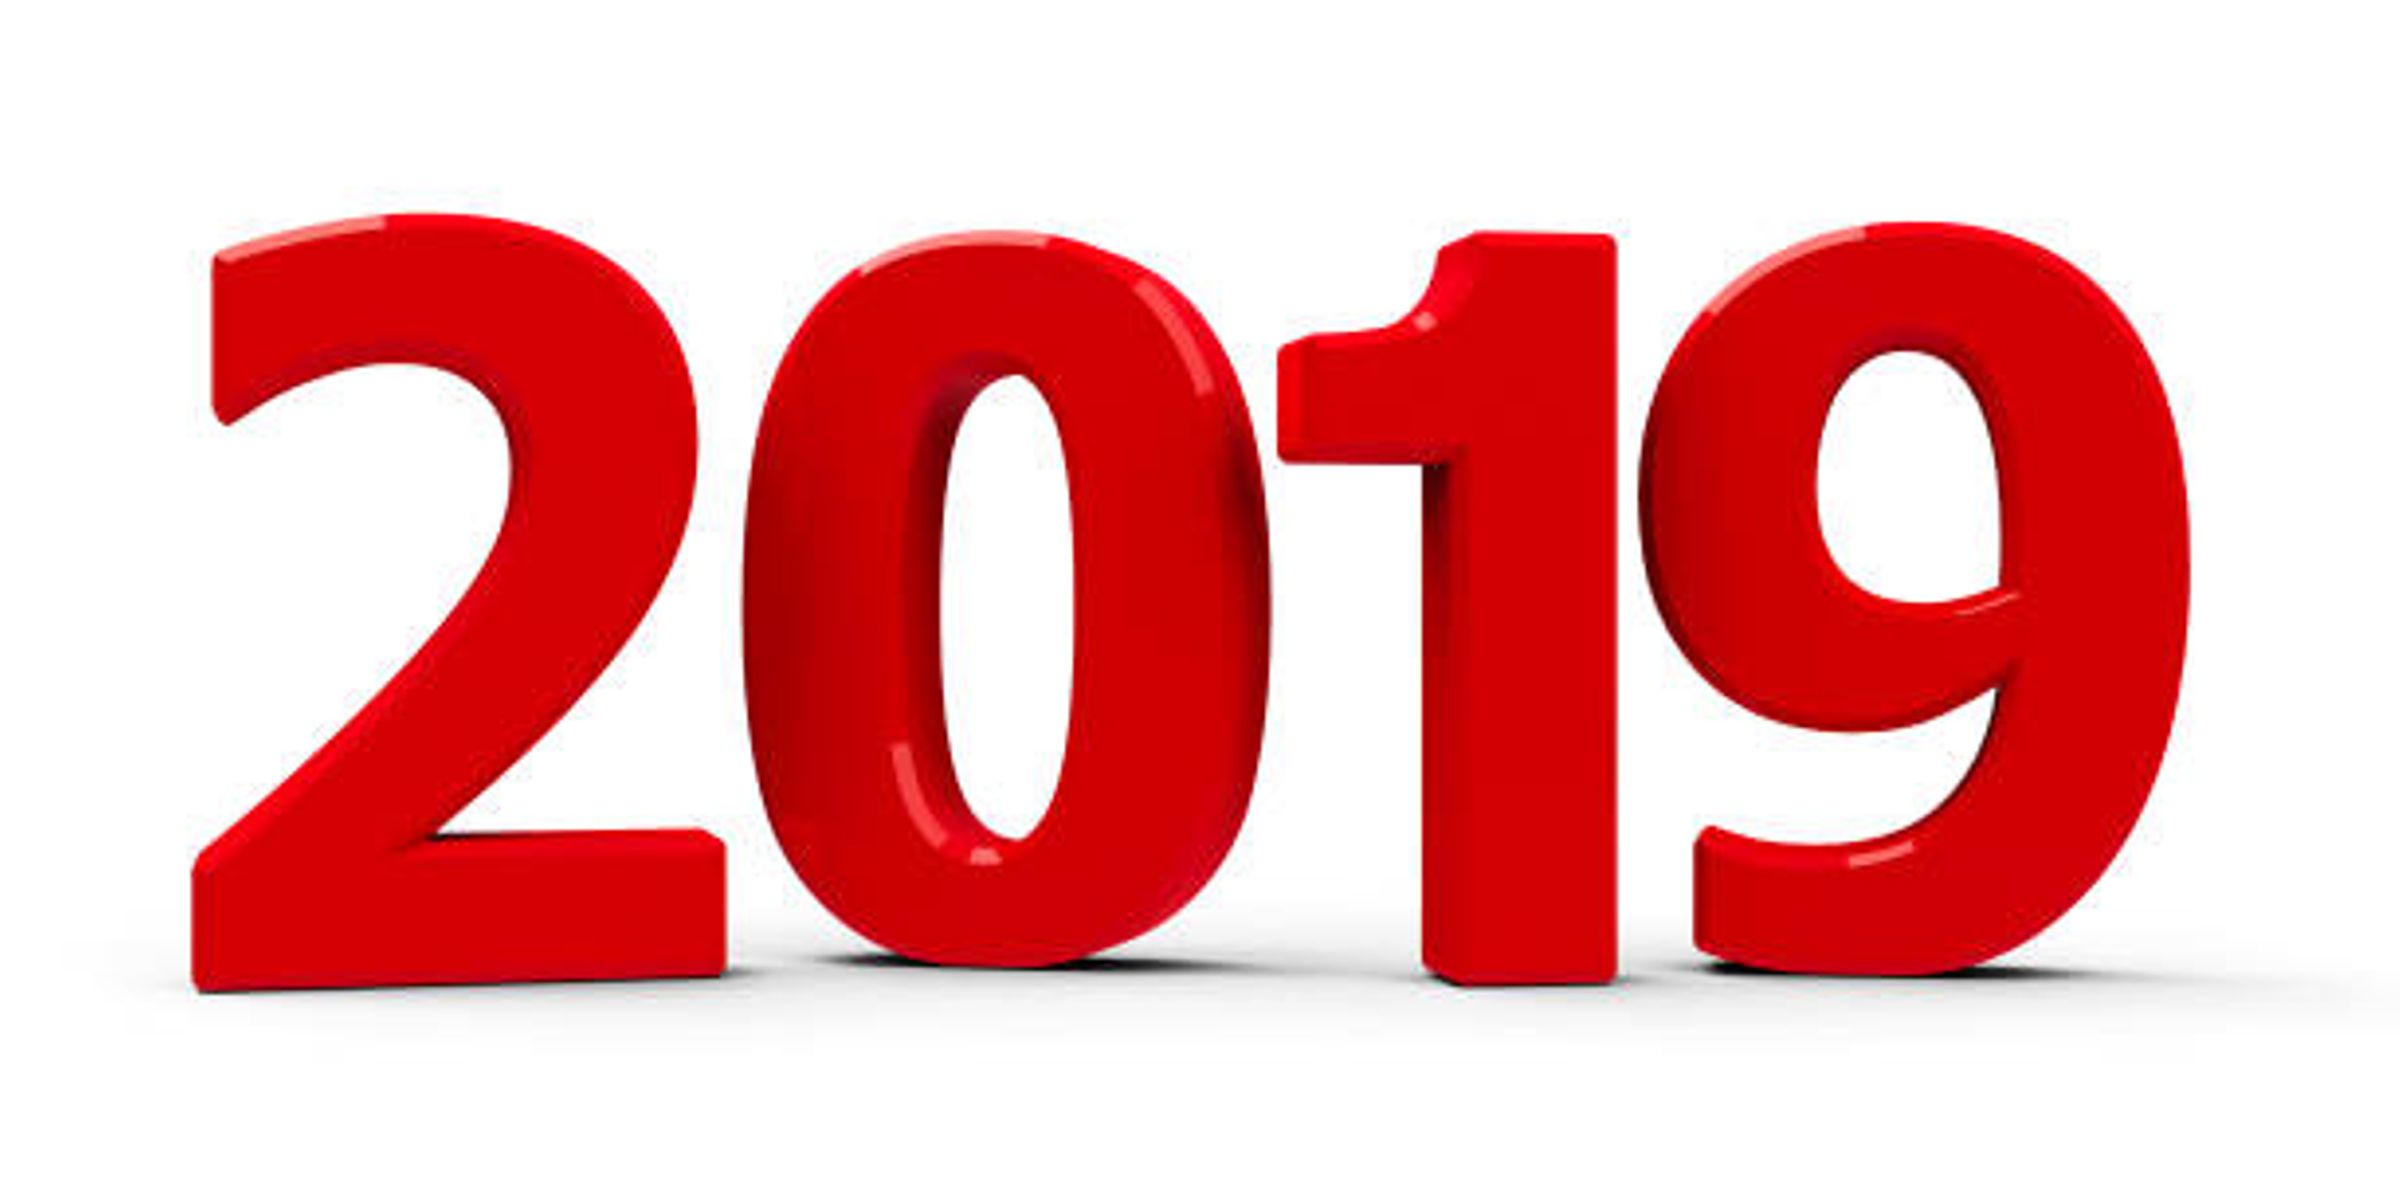 Make 2019 your year